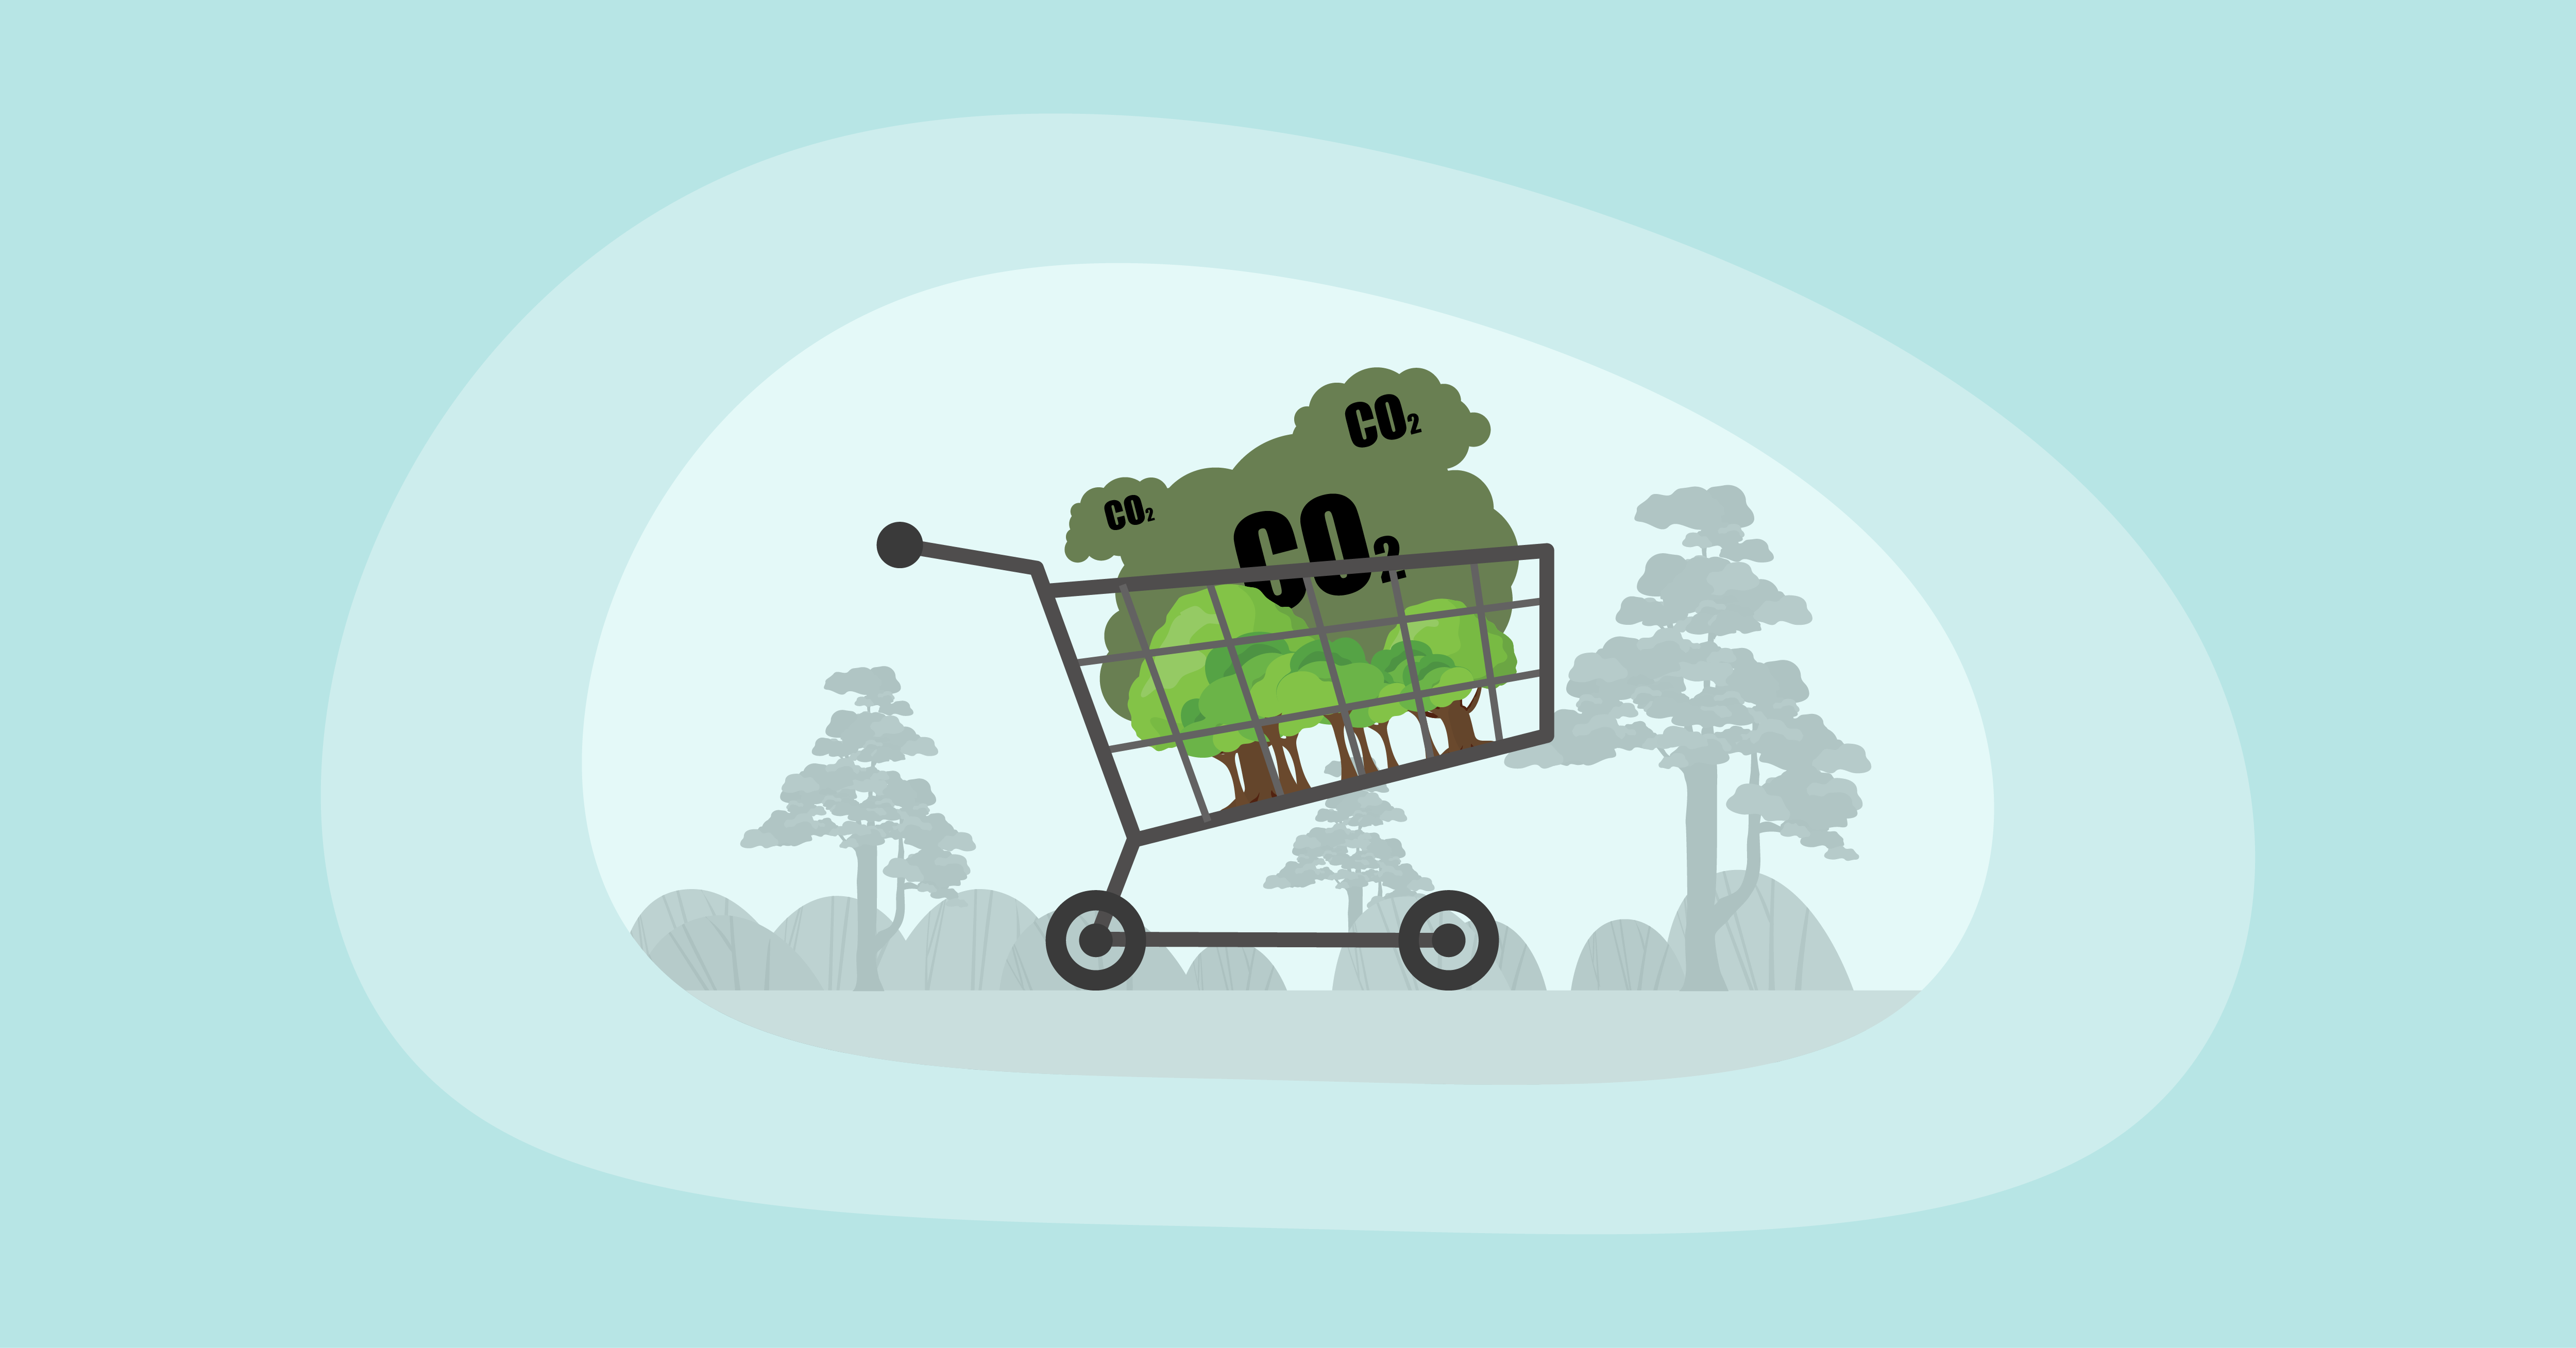 Attempted illustration of a carbon offset purchase